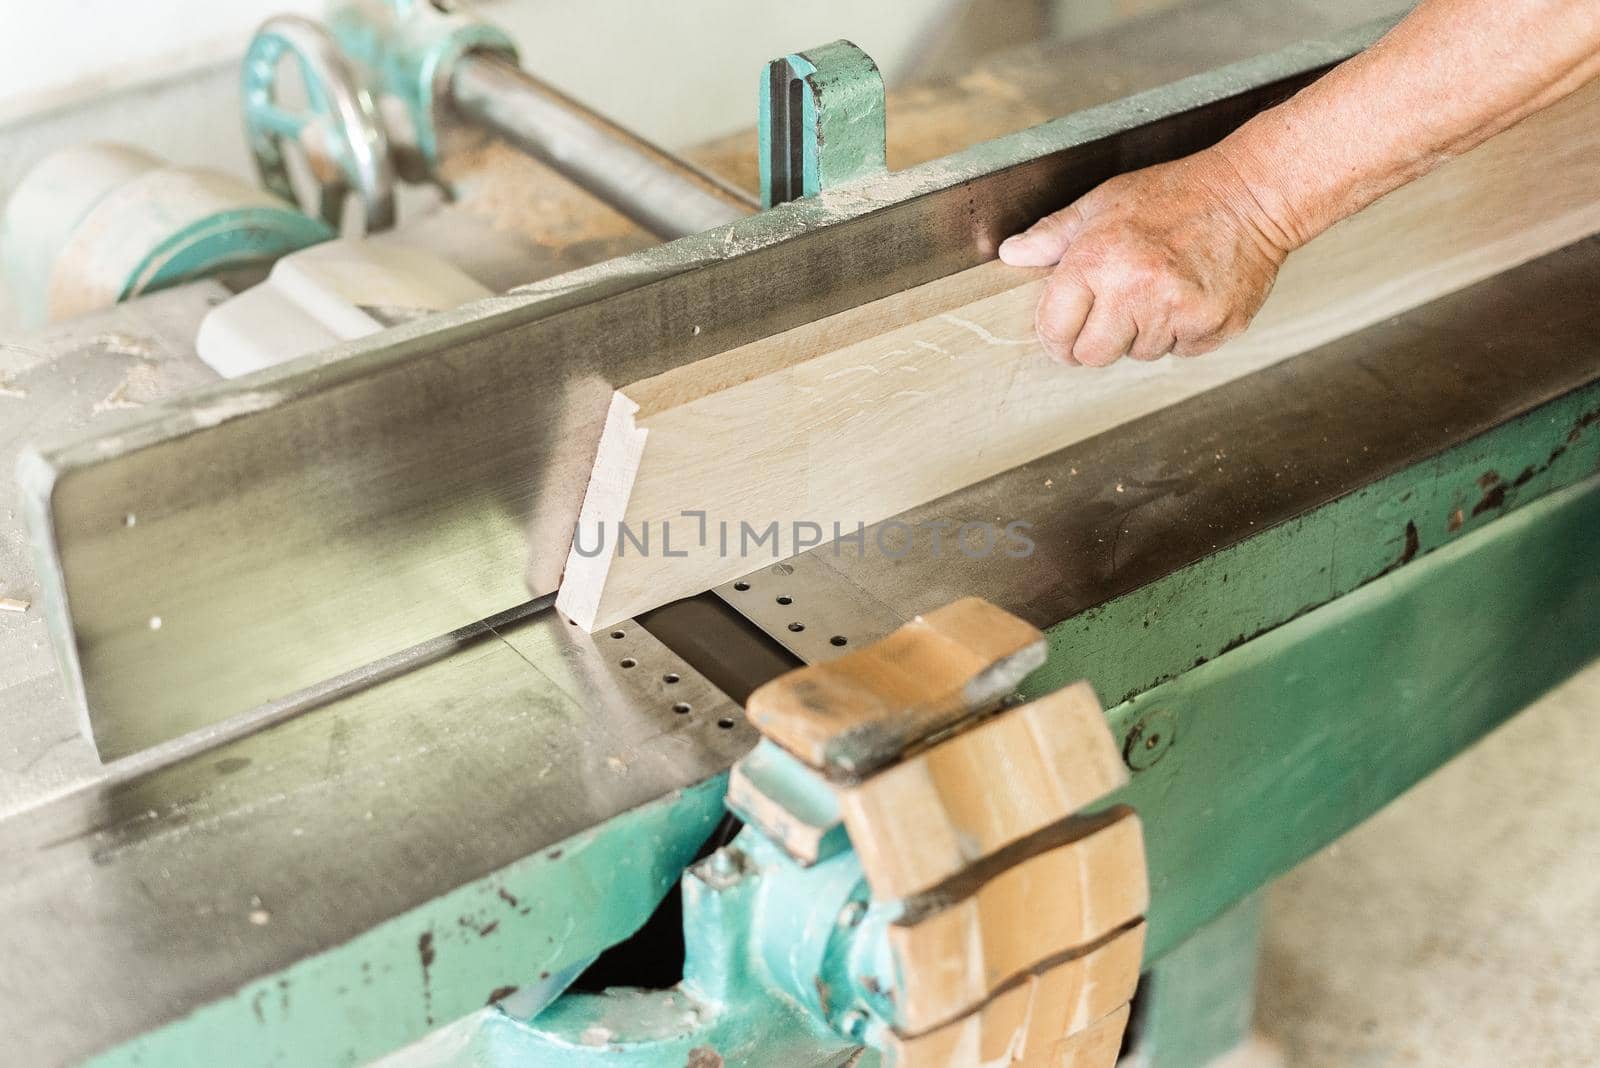 Person working with a wood planing machine, horizontal foreground